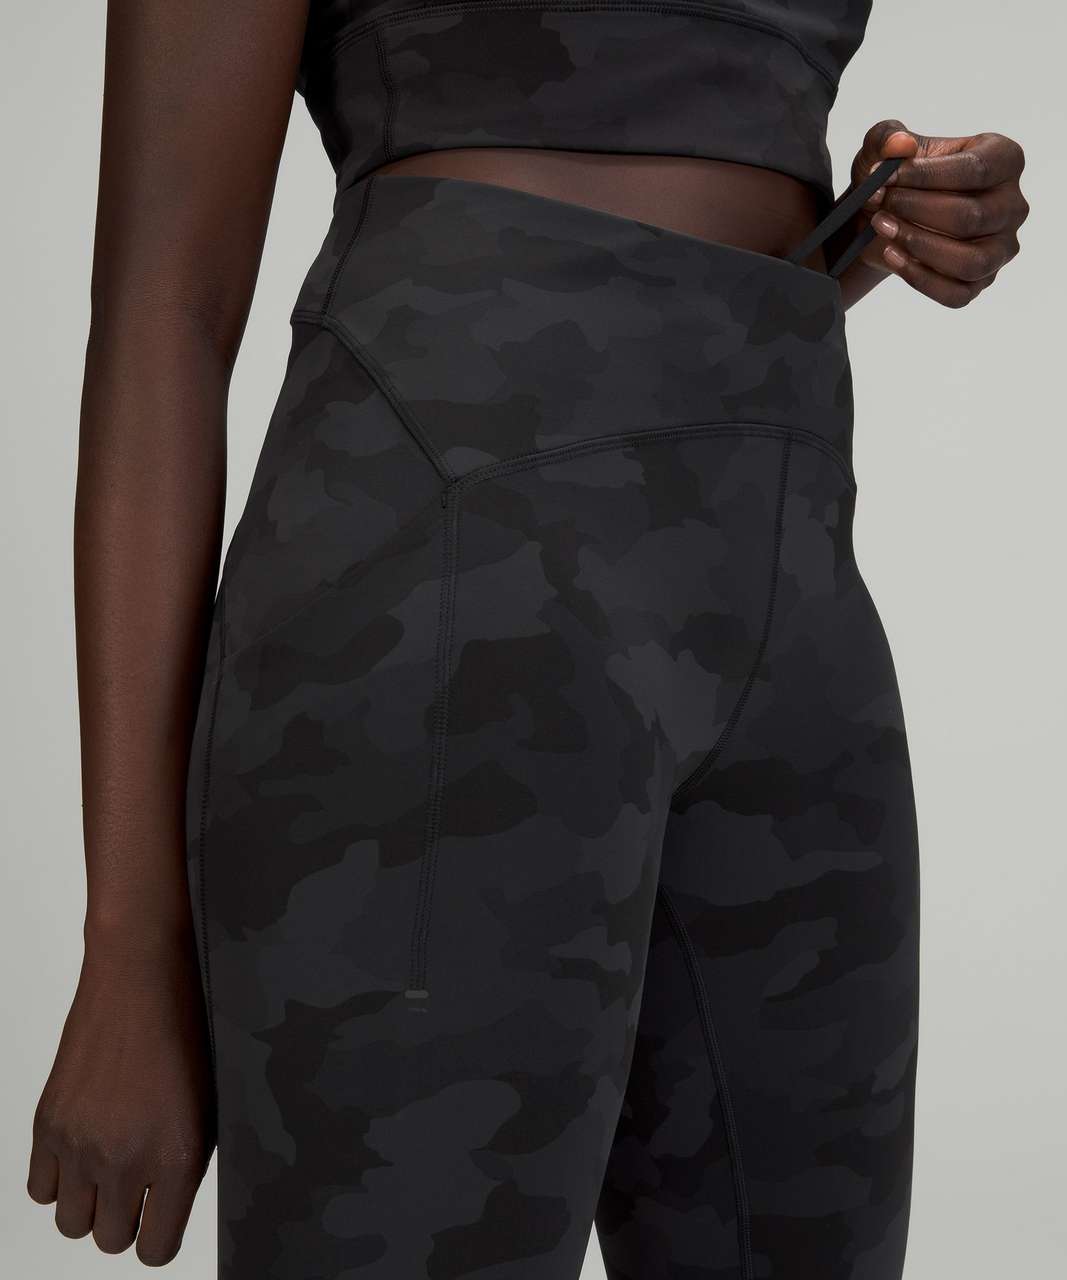 lululemon athletica Camouflage Active Pants, Tights & Leggings